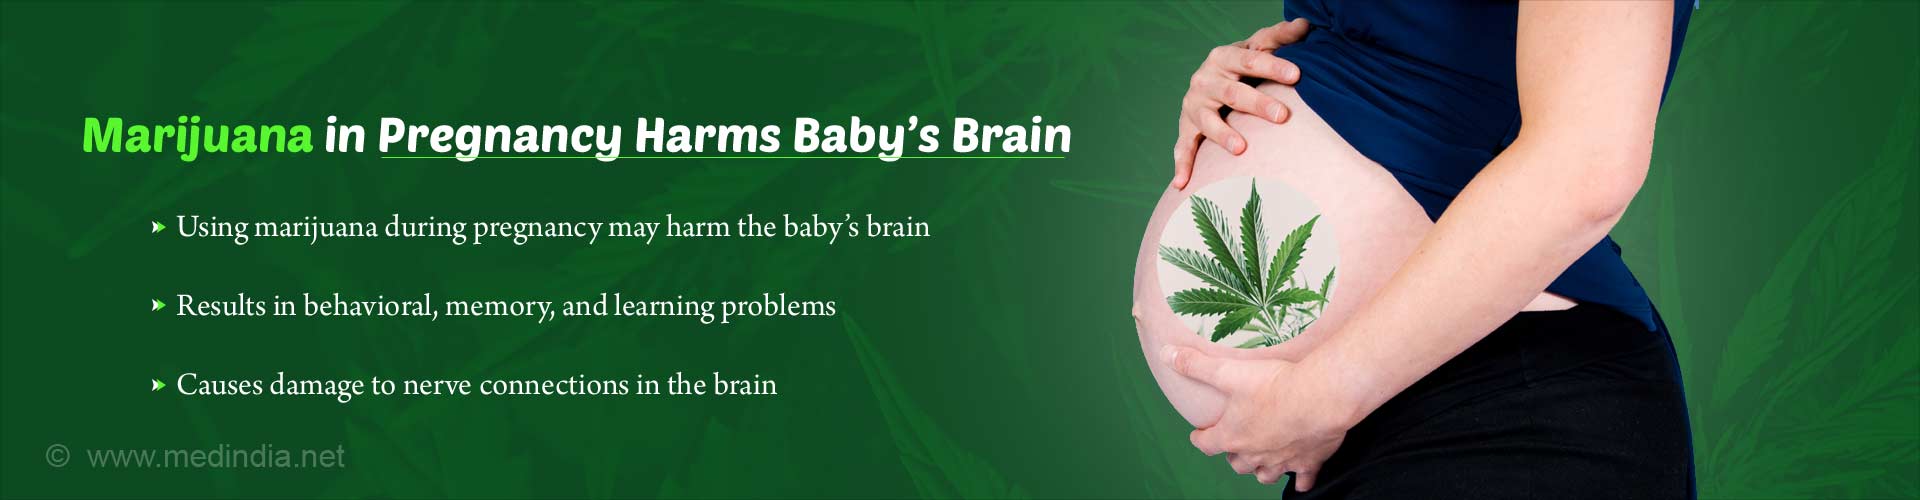 Marijuana in pregnancy harms baby's brain. Using marijuana during pregnancy may harm the baby's brain. Results in behavioral, memory, and learning problems. Causes damage to nerve connections in the brain.